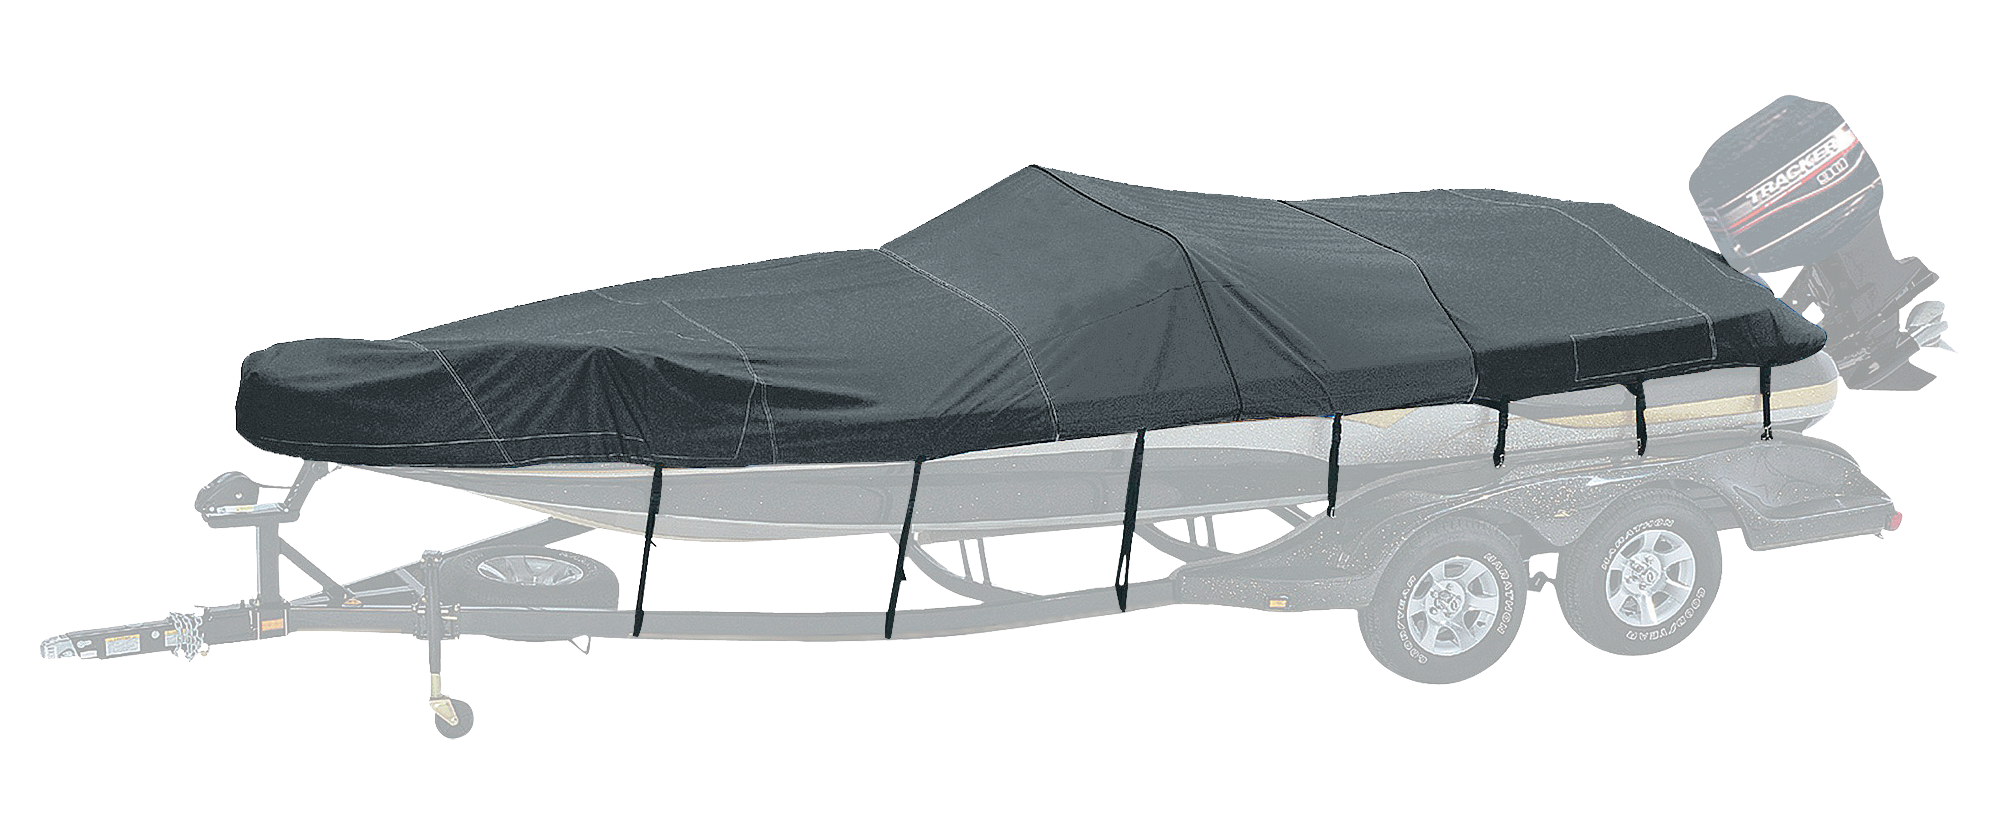 Bass Pro Shops Exact Fit Boat Cover by Westland- Tahoe Boats - 2005 195 Deckboat I/O - Charcoal